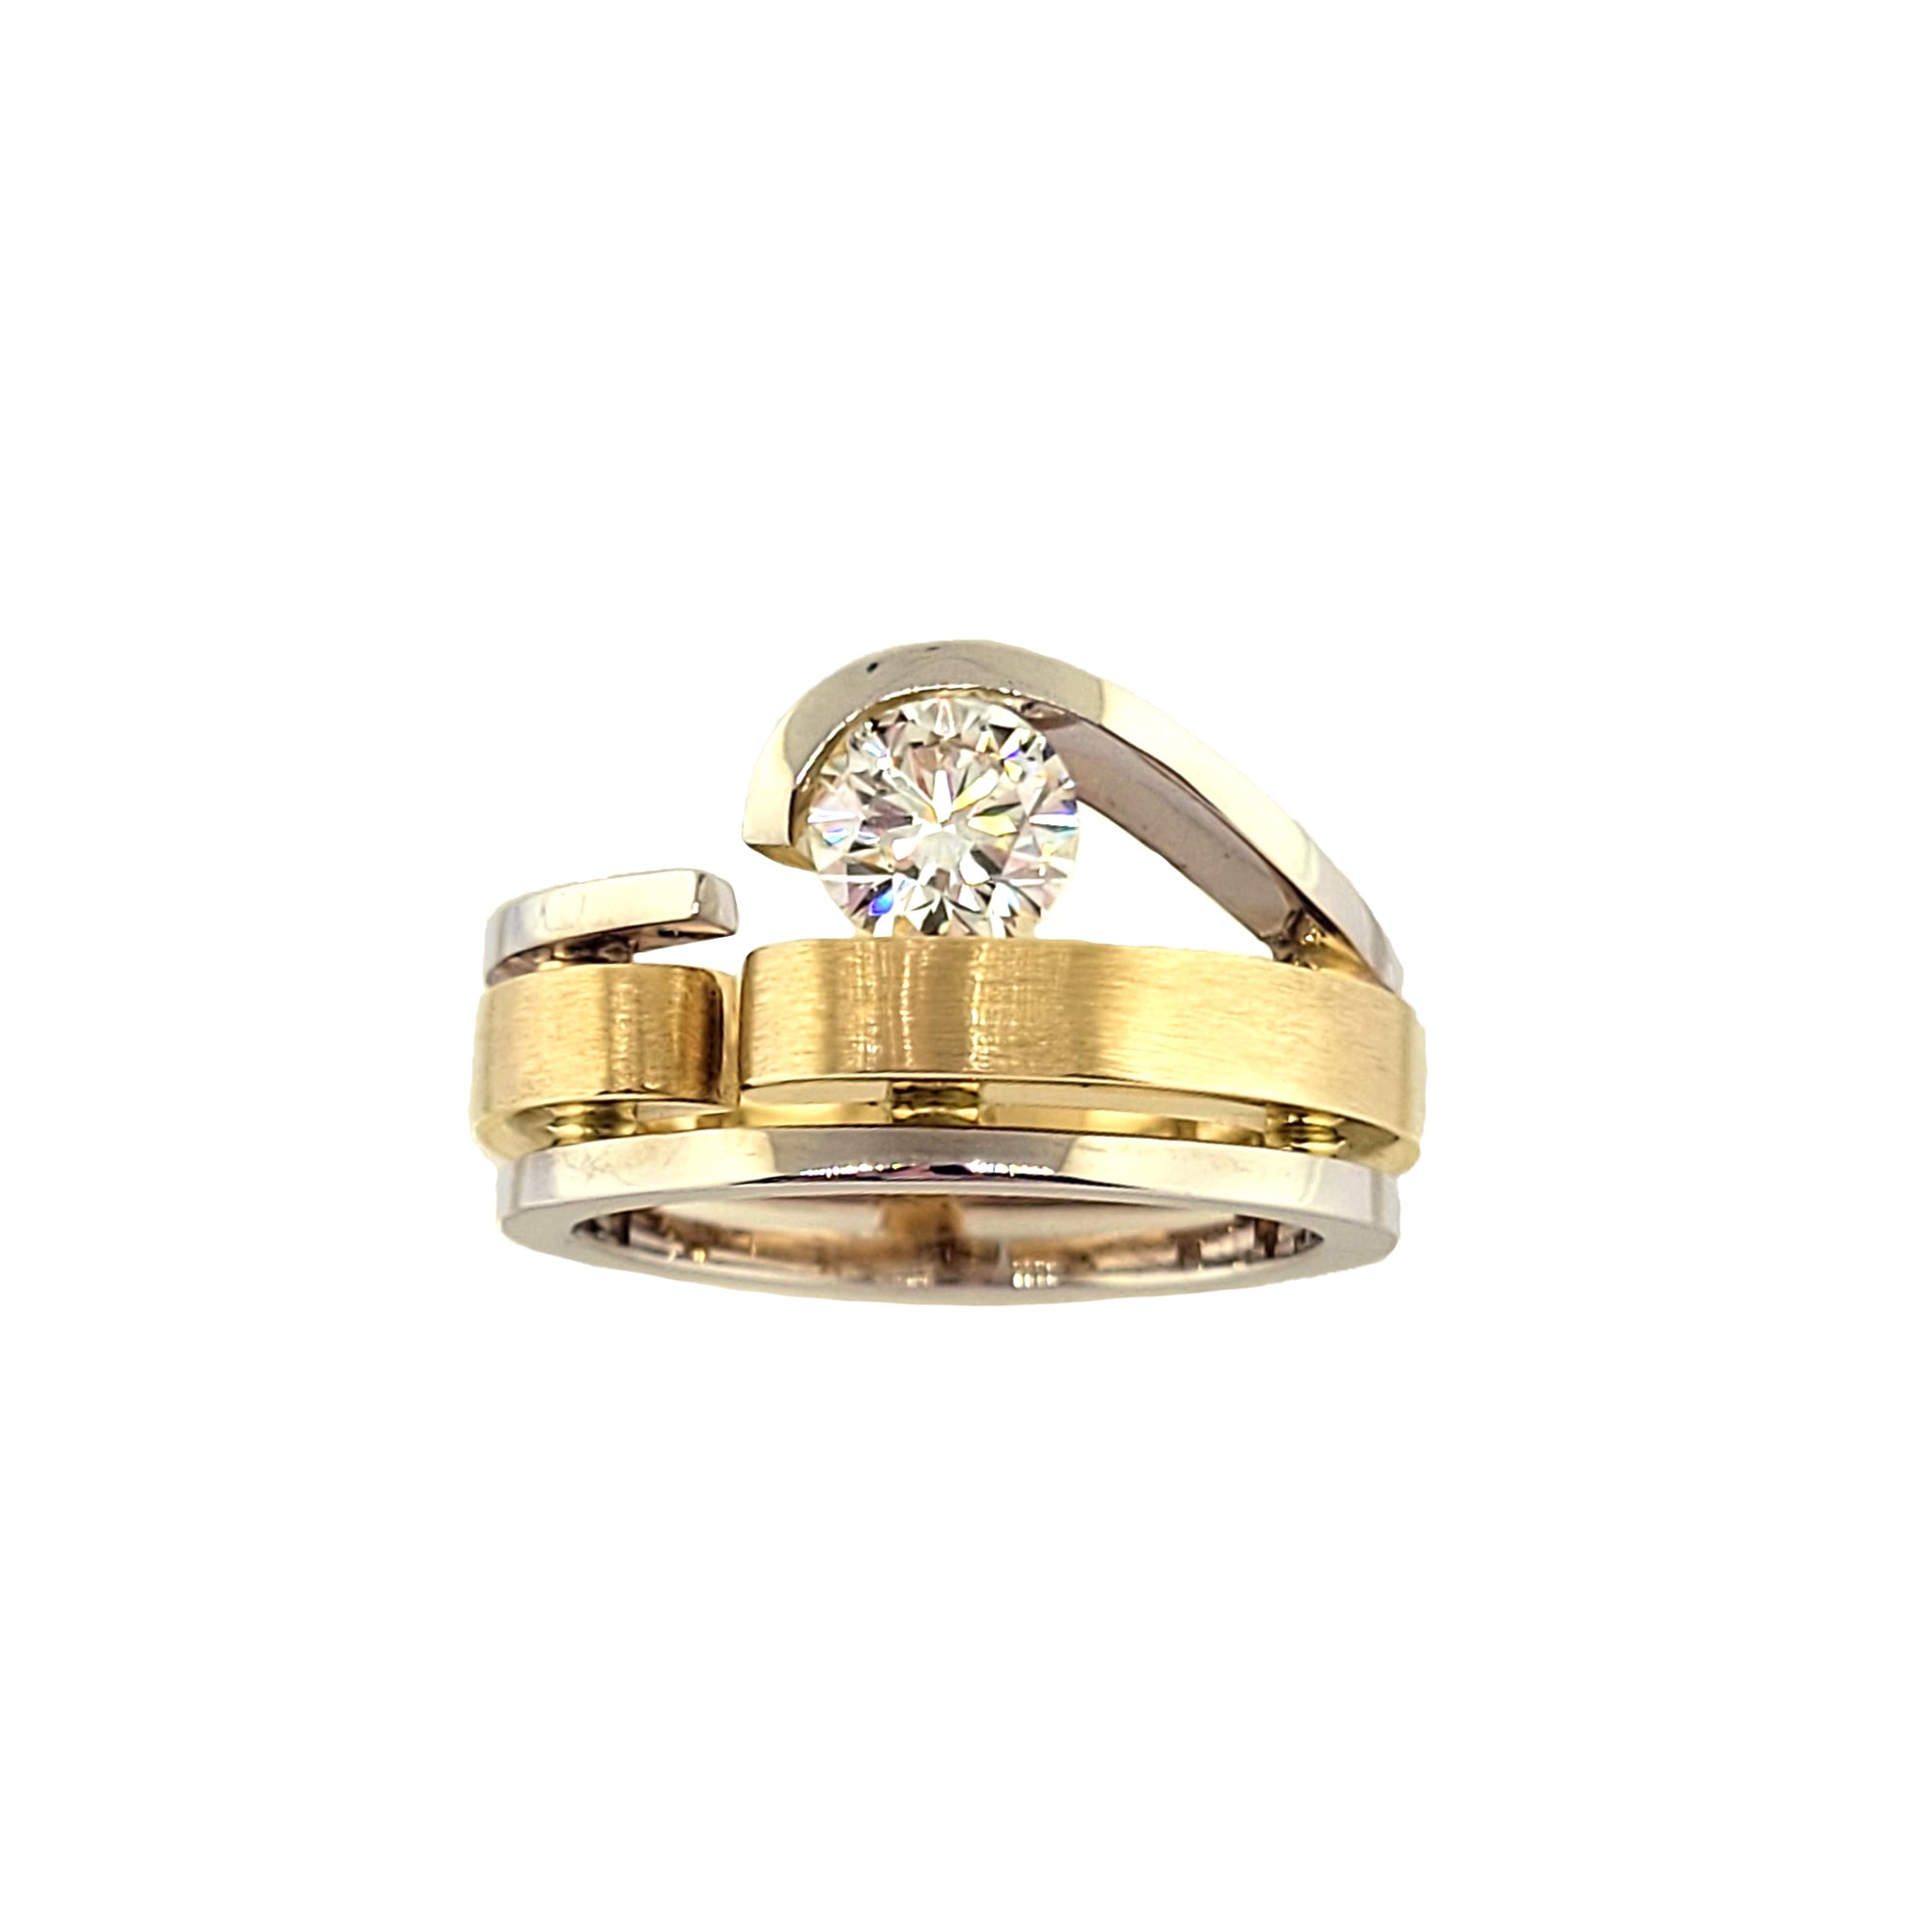 14K W/G and 18K Y/G Pseudo Tension Diamond Ring